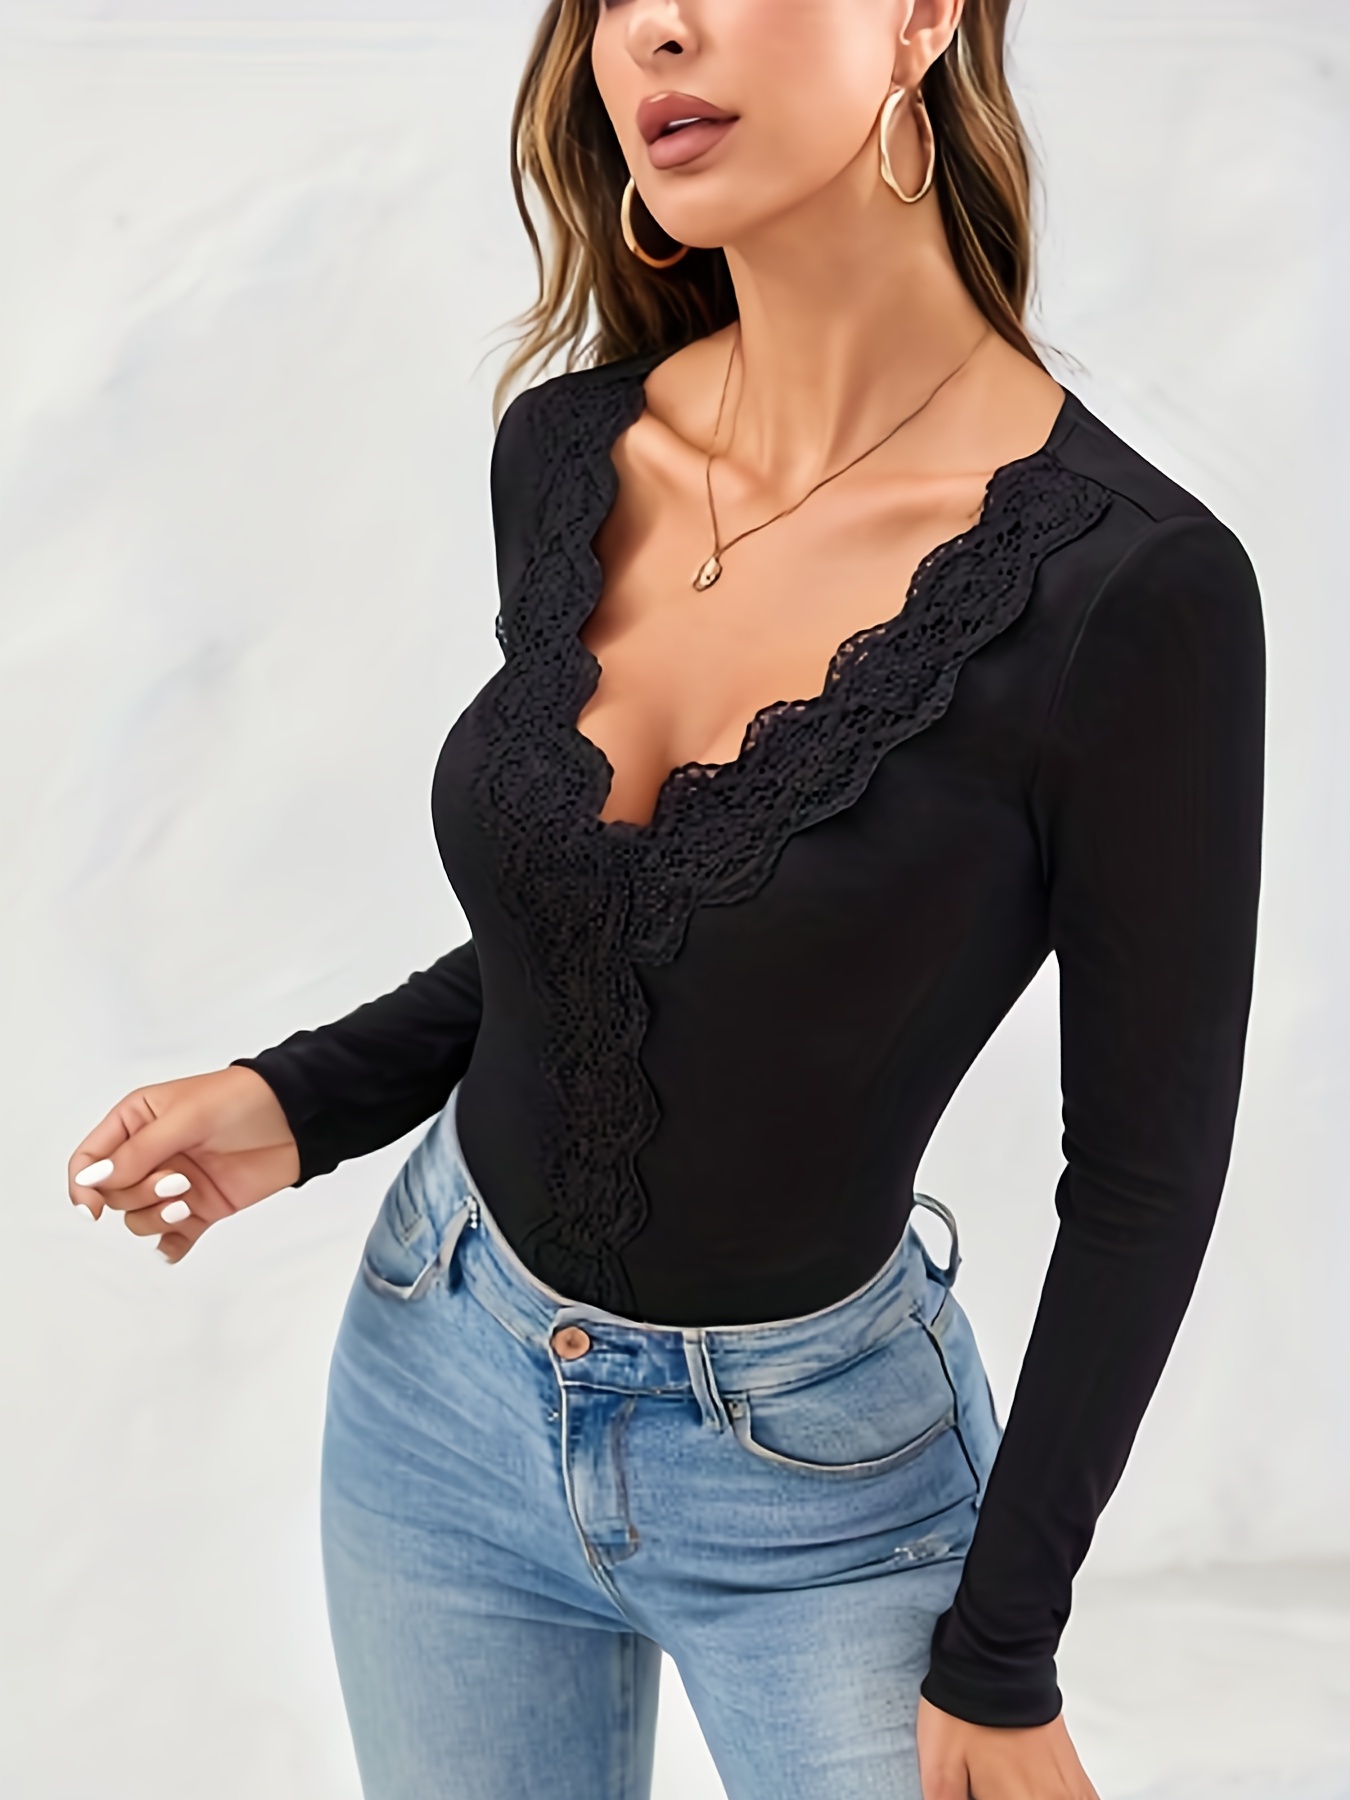 CAMILLE Long Sleeve Lace Bodysuit - Wilde Thing